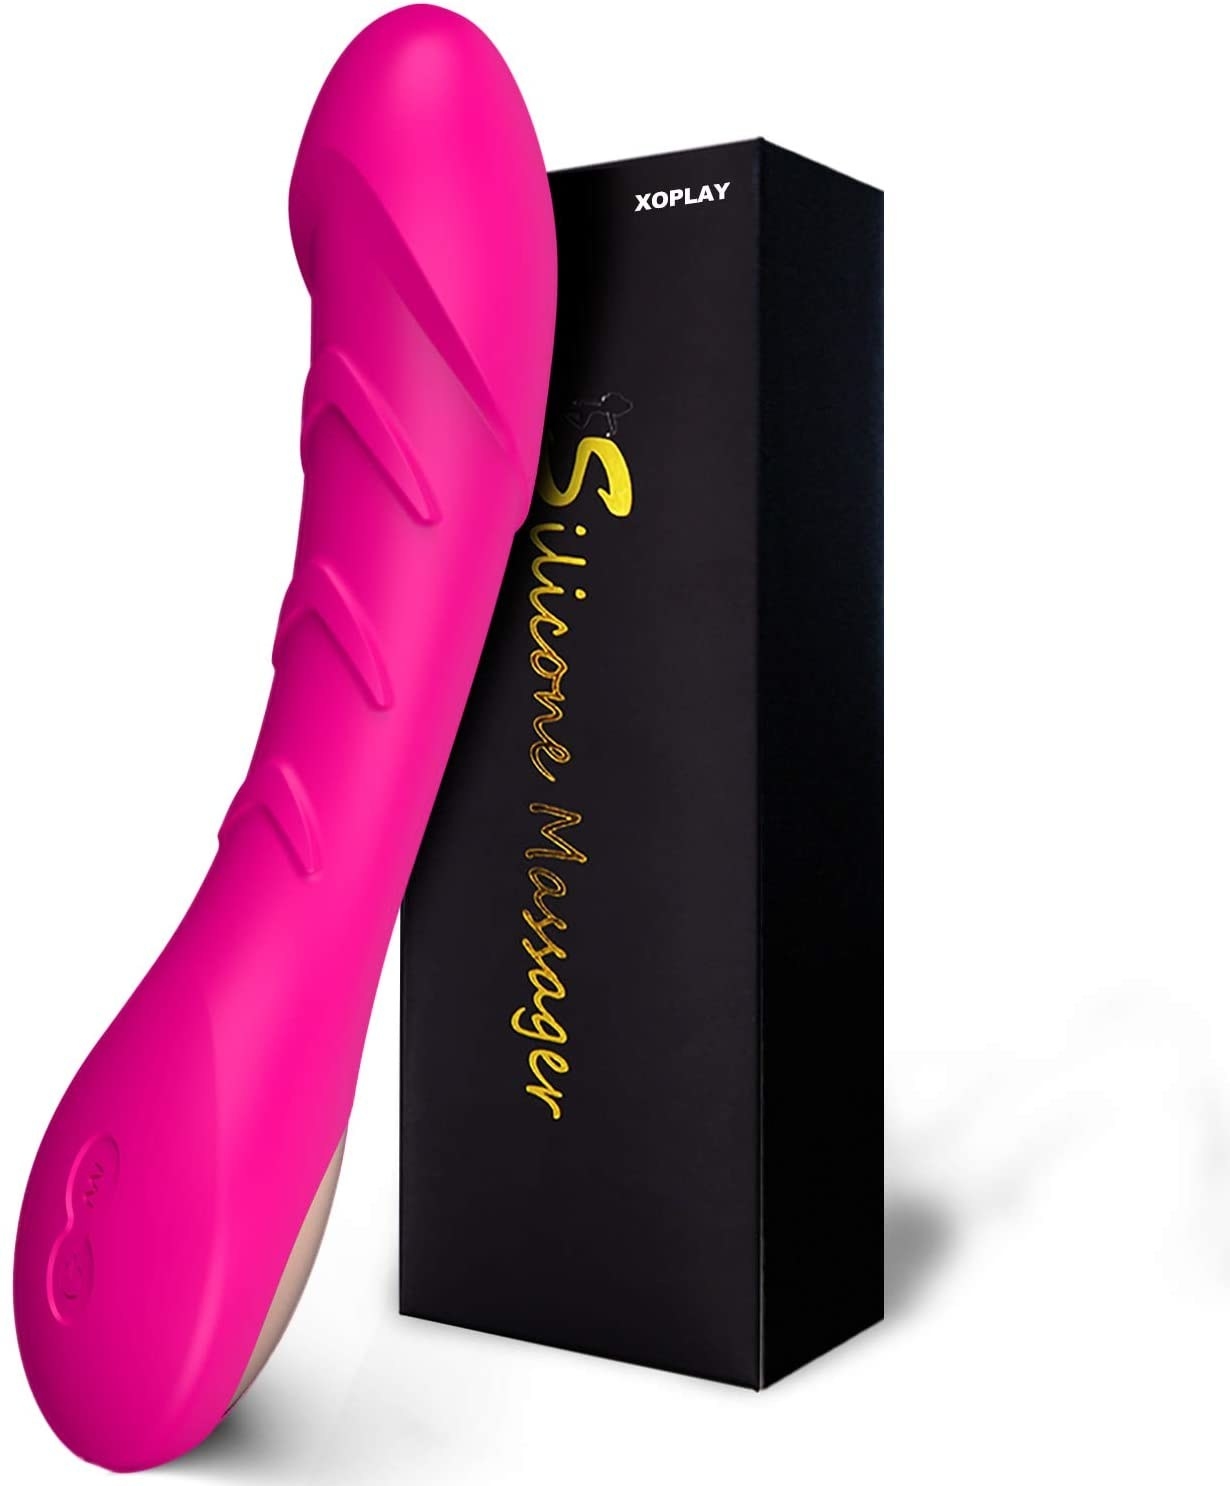 The vibrator leaning on its box